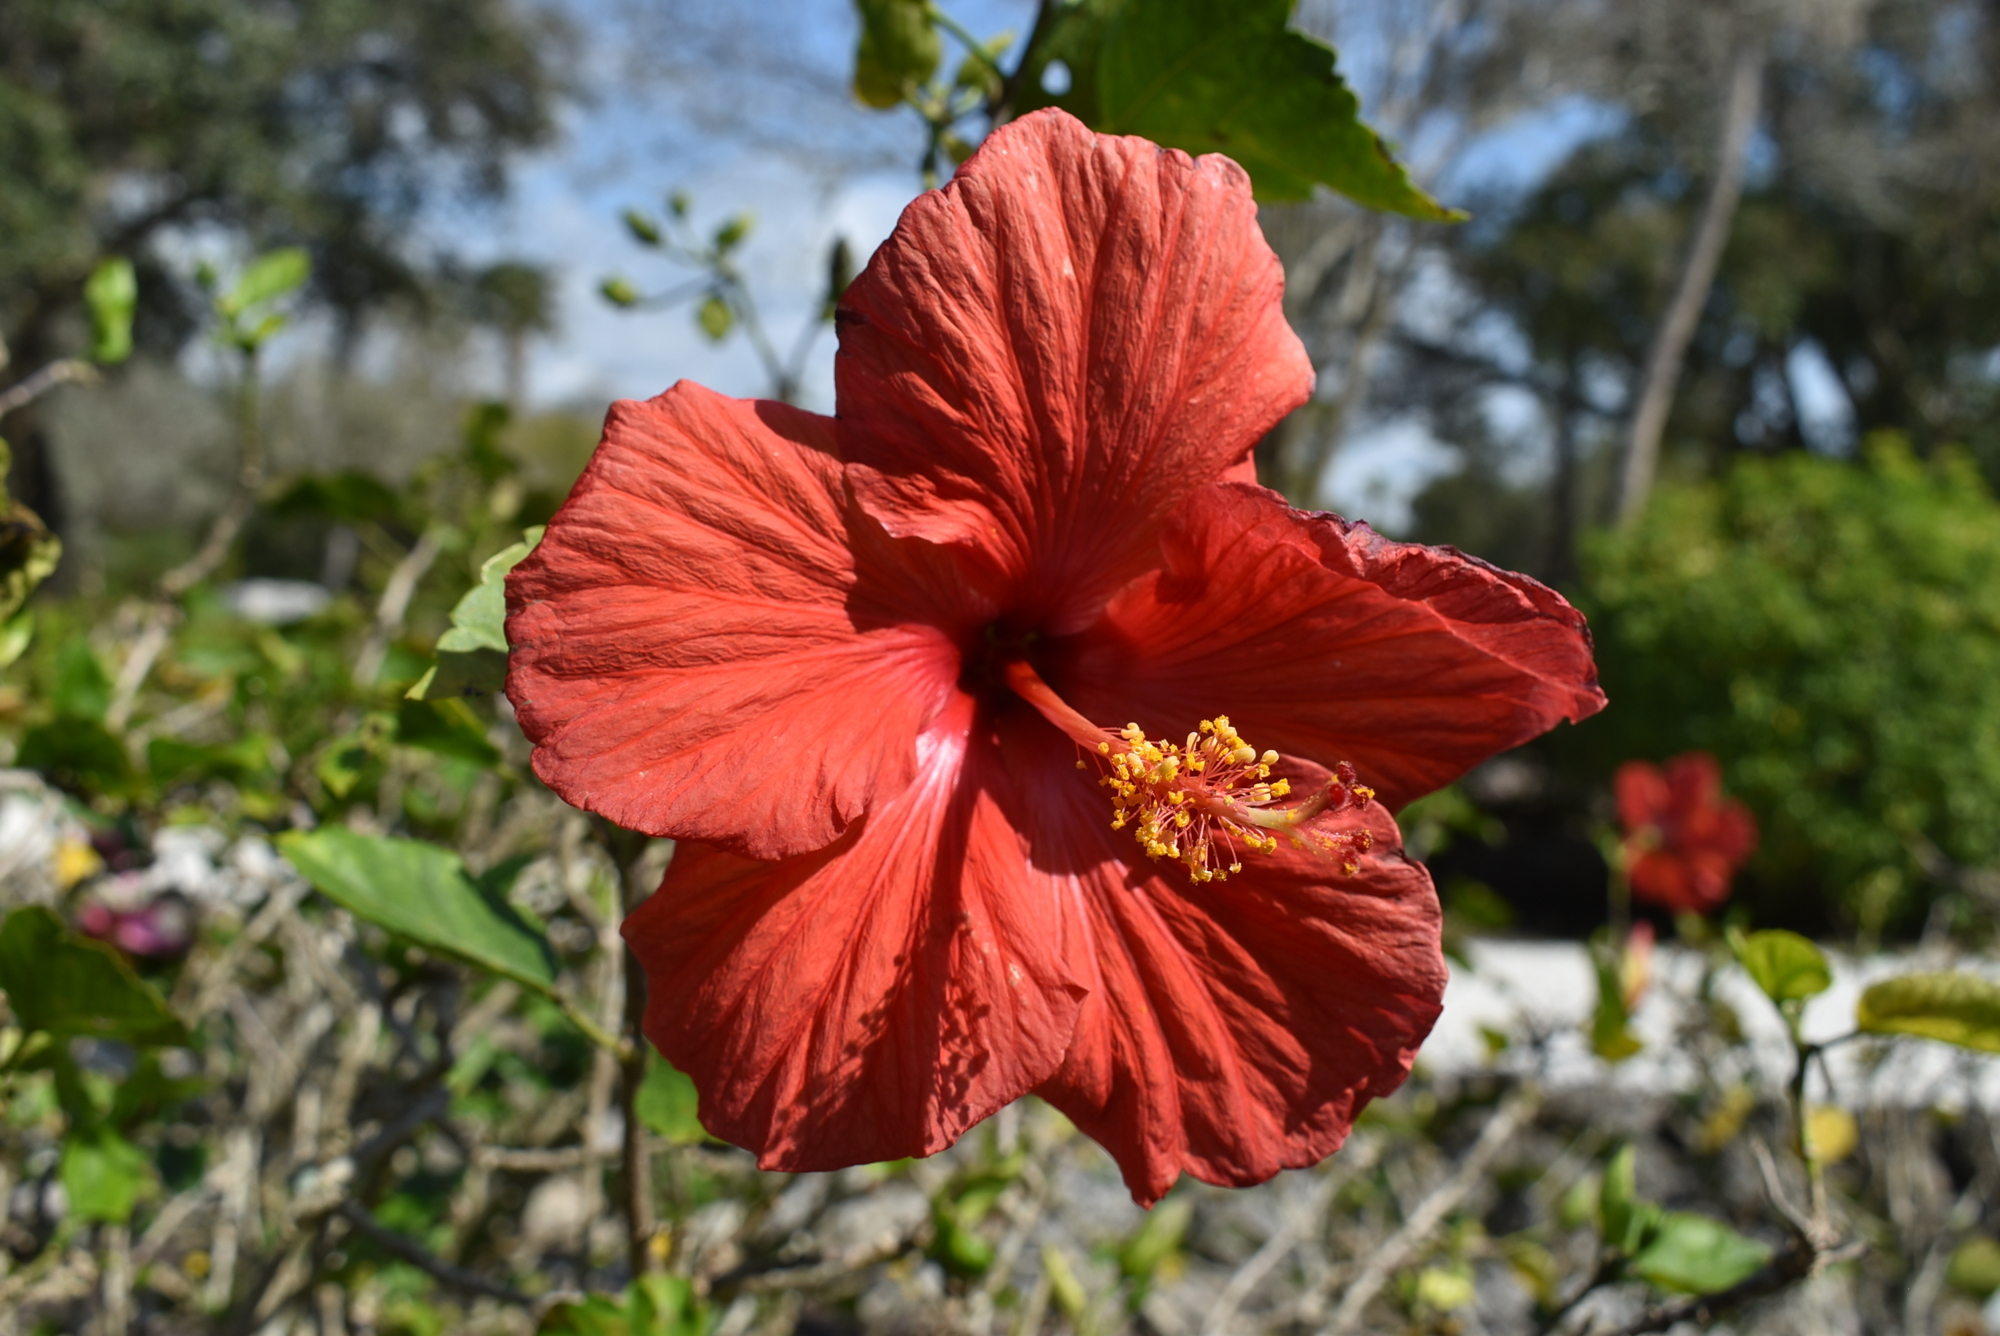 Hibiscus are blooming in Joan Durante Park.